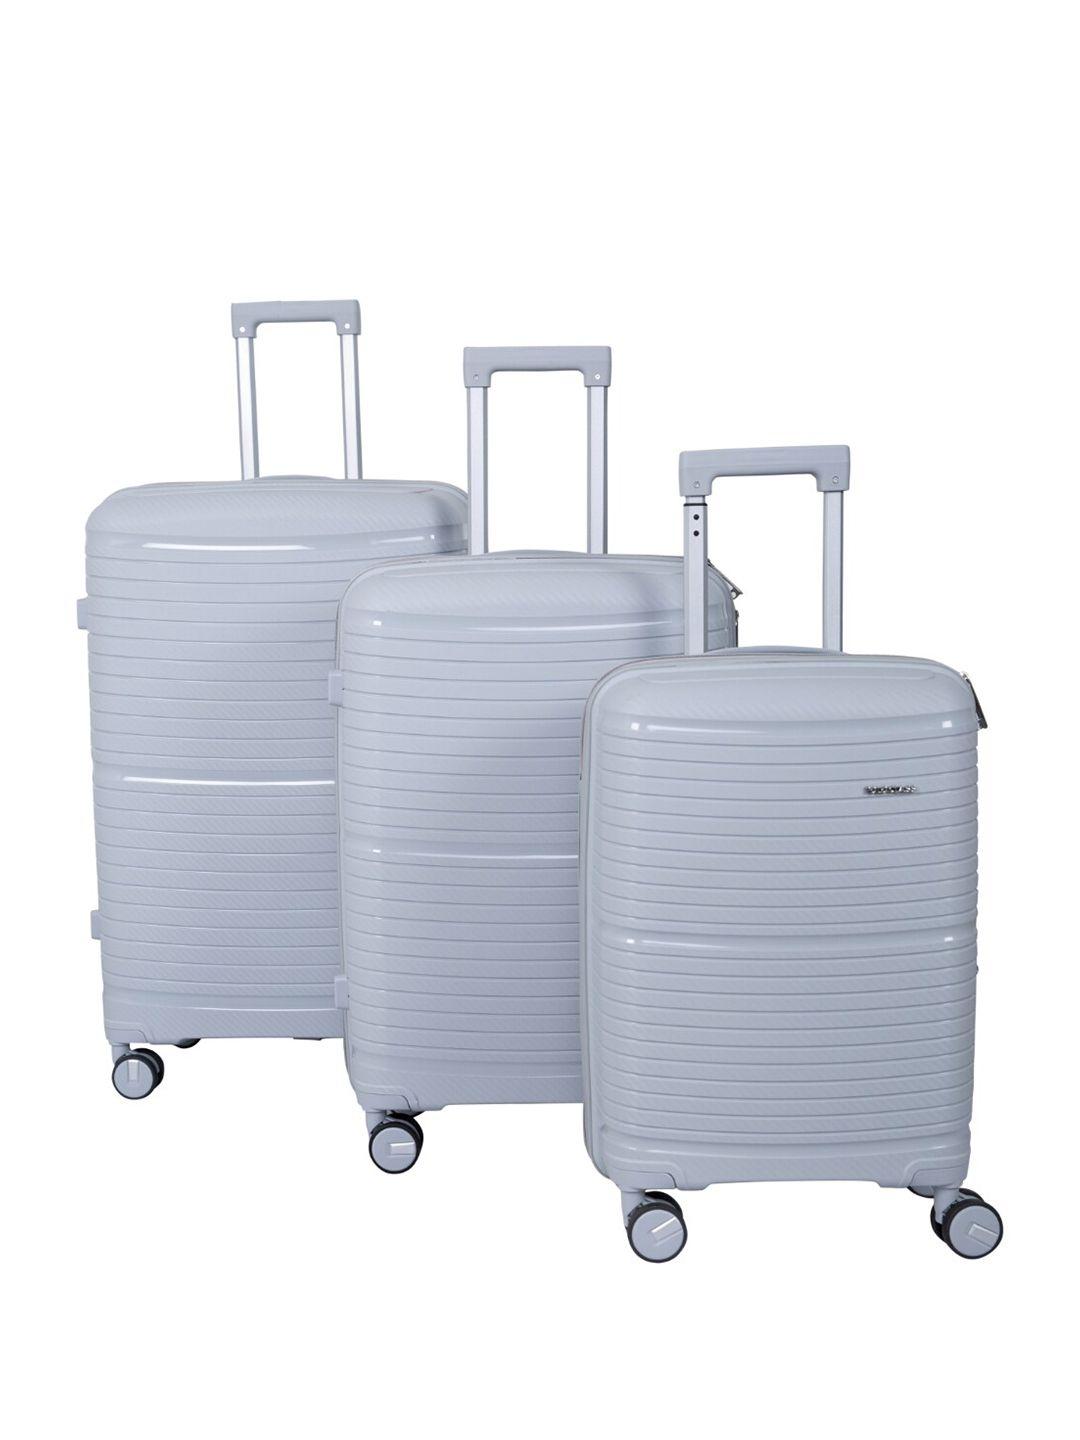 polo class set of 3 textured hard-sided large medium & cabin trolley suitcases -70 l